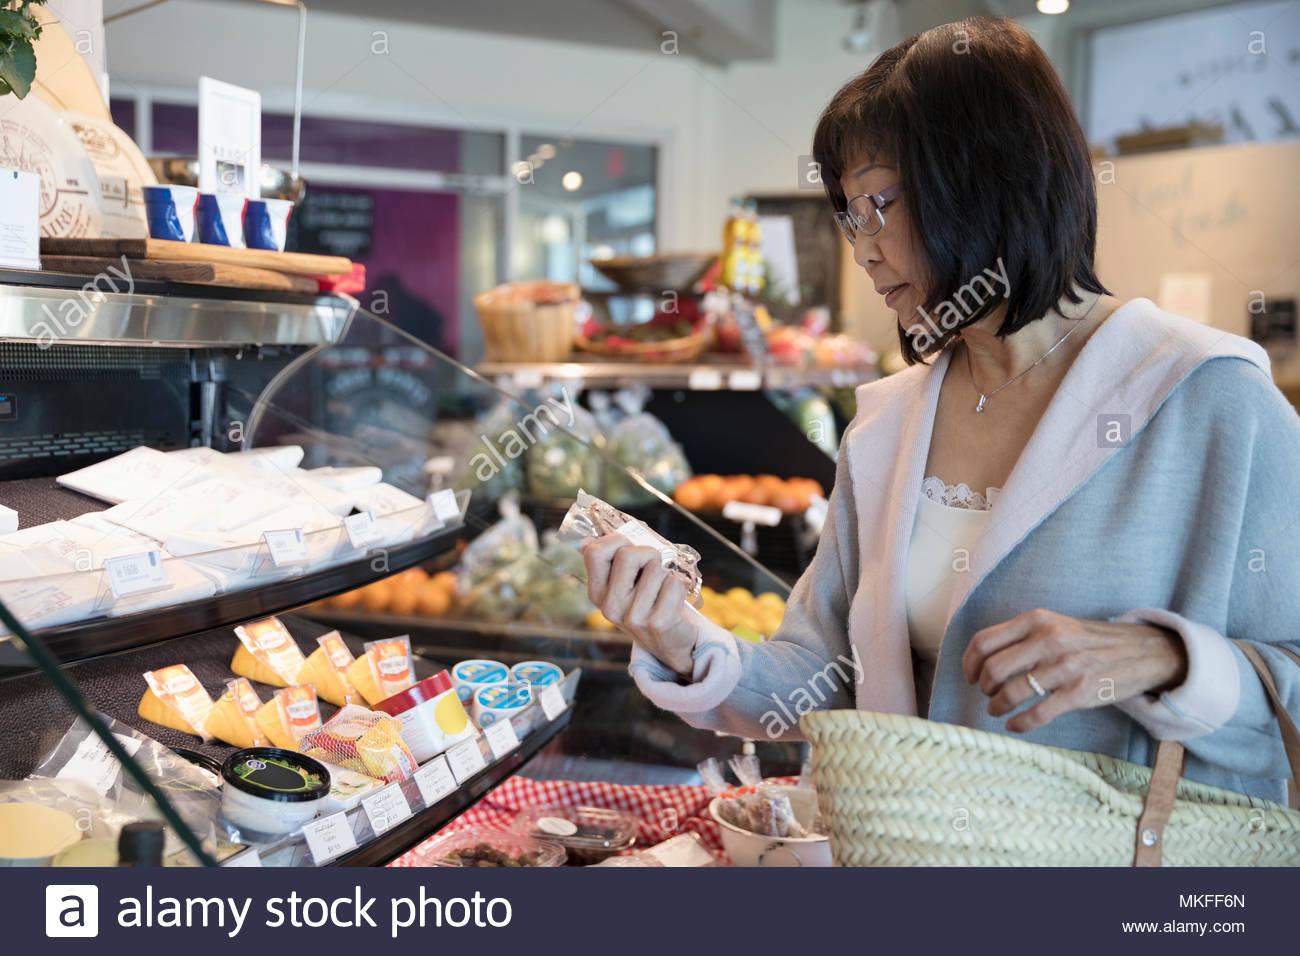 Senior woman browsing deli display in grocery store Stock Photo